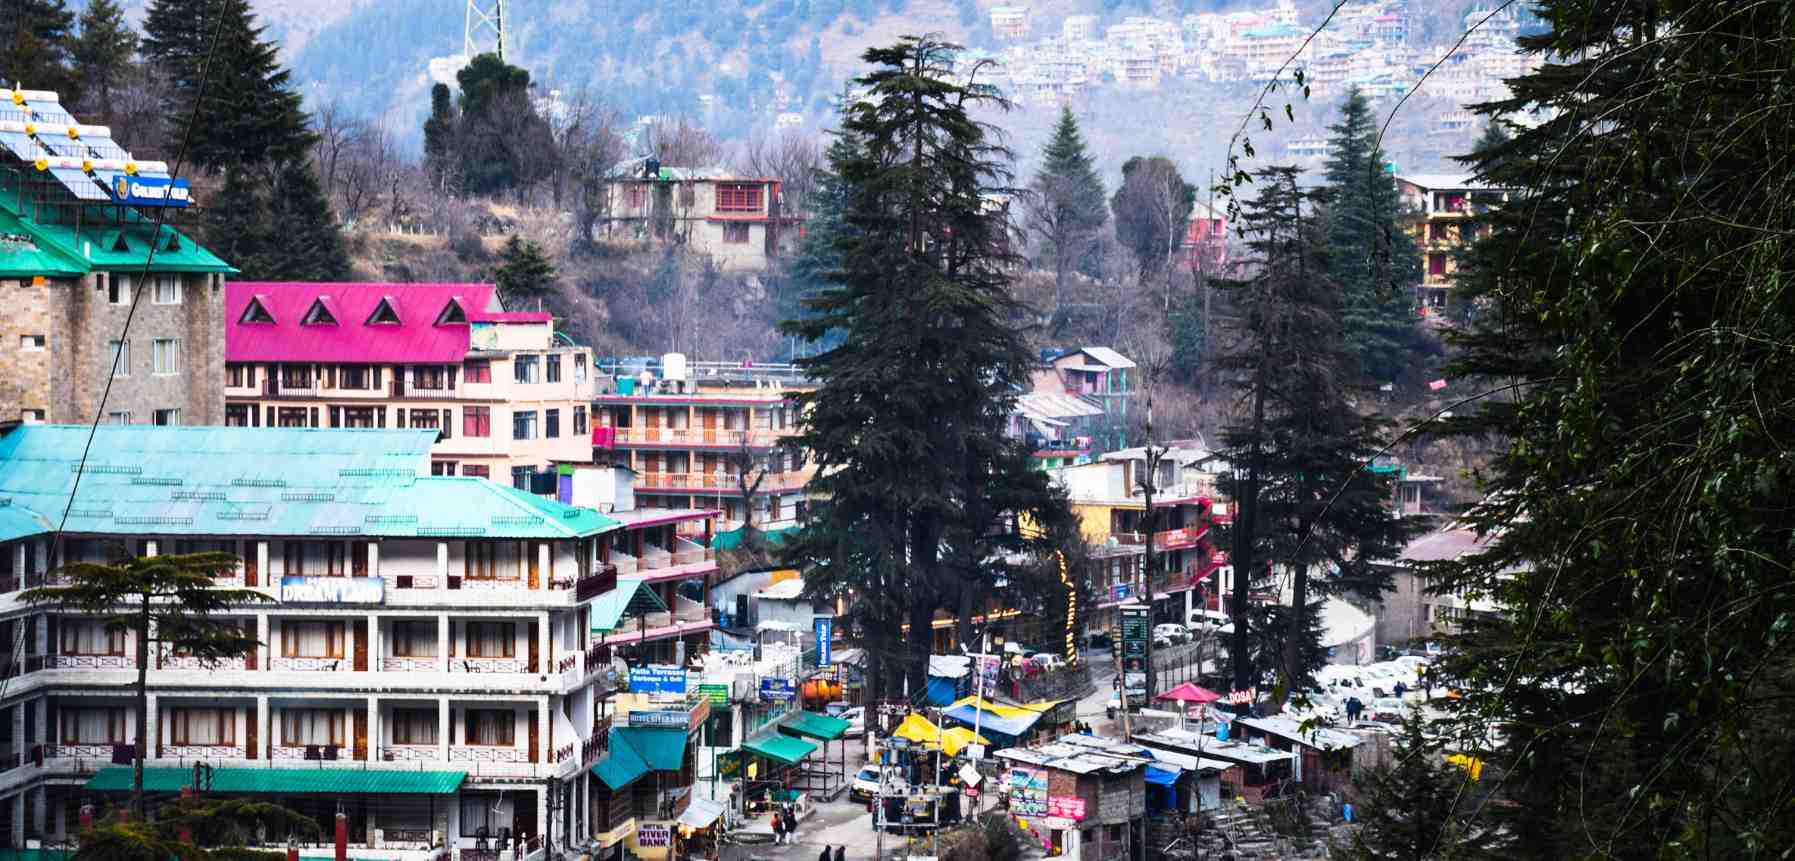 Explore the old town of Manali